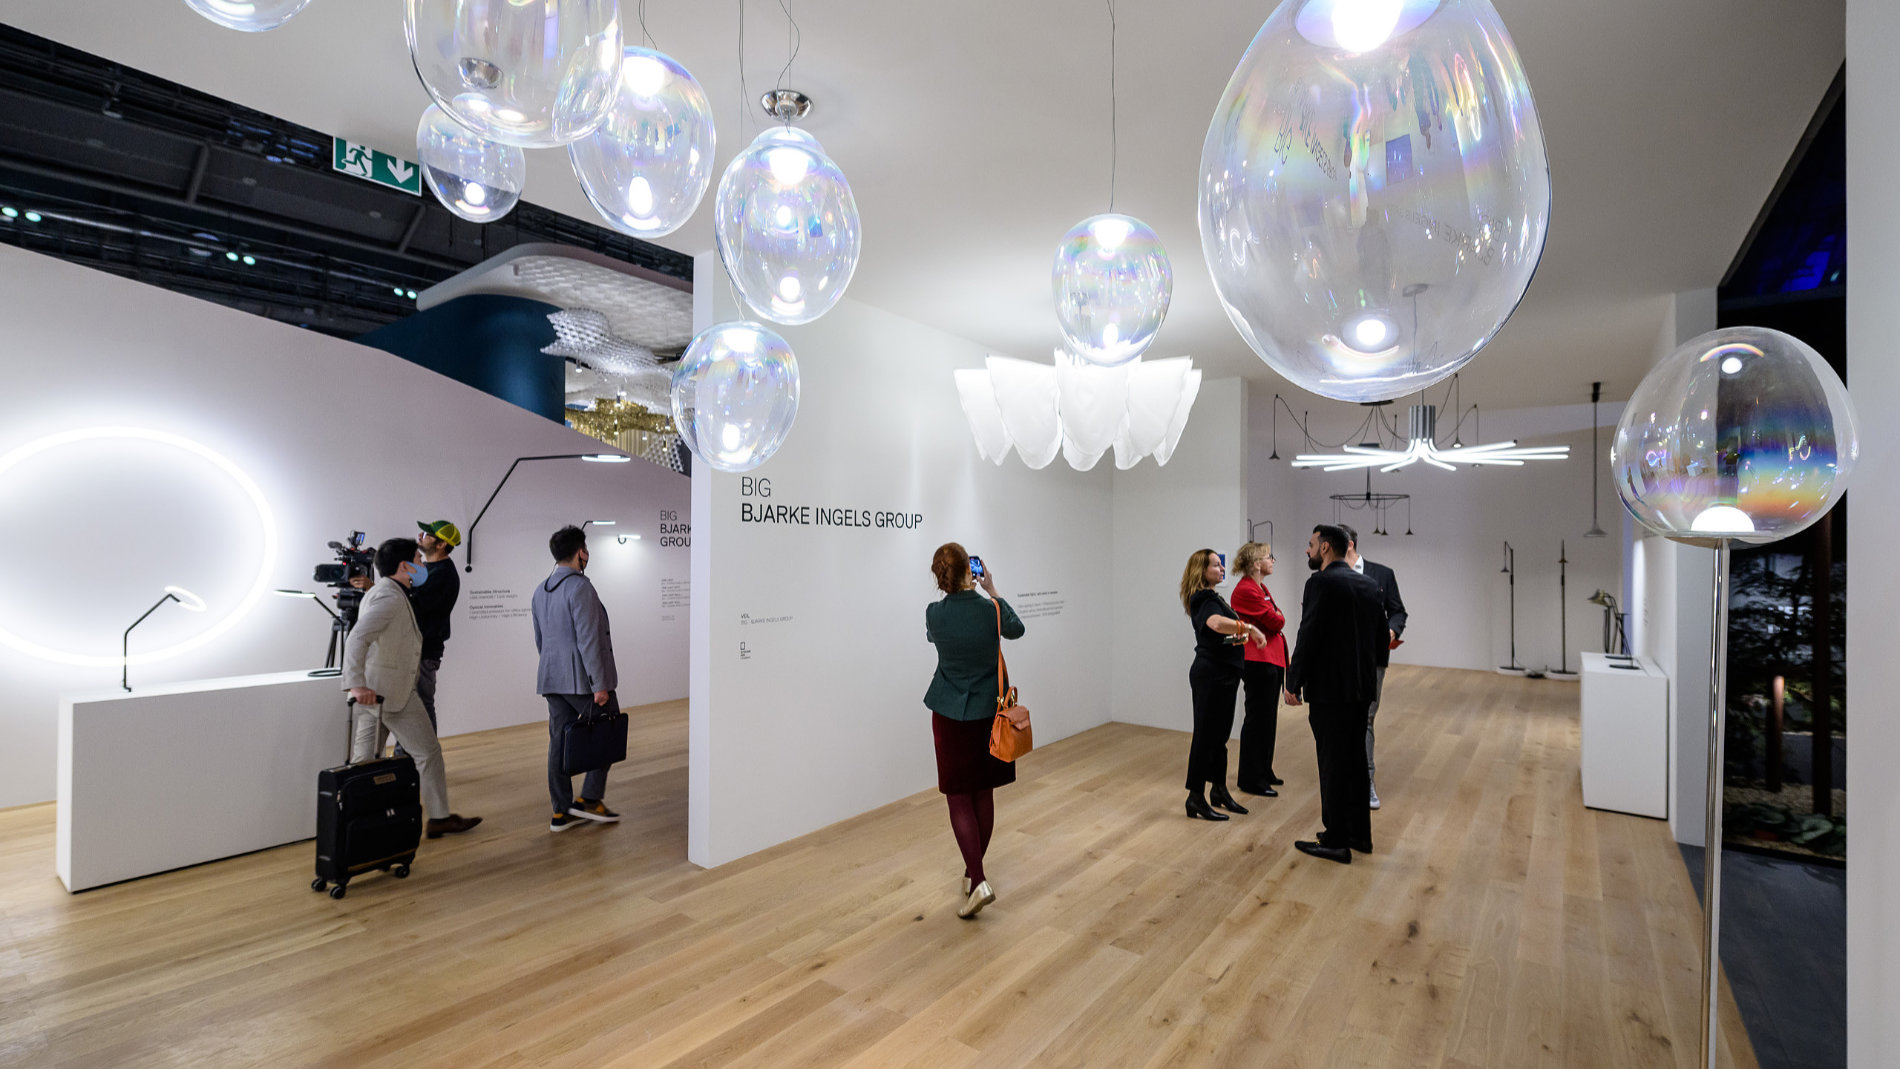 Beautiful hand-crafted luminaires seem to float in the room like shimmering soap bubbles